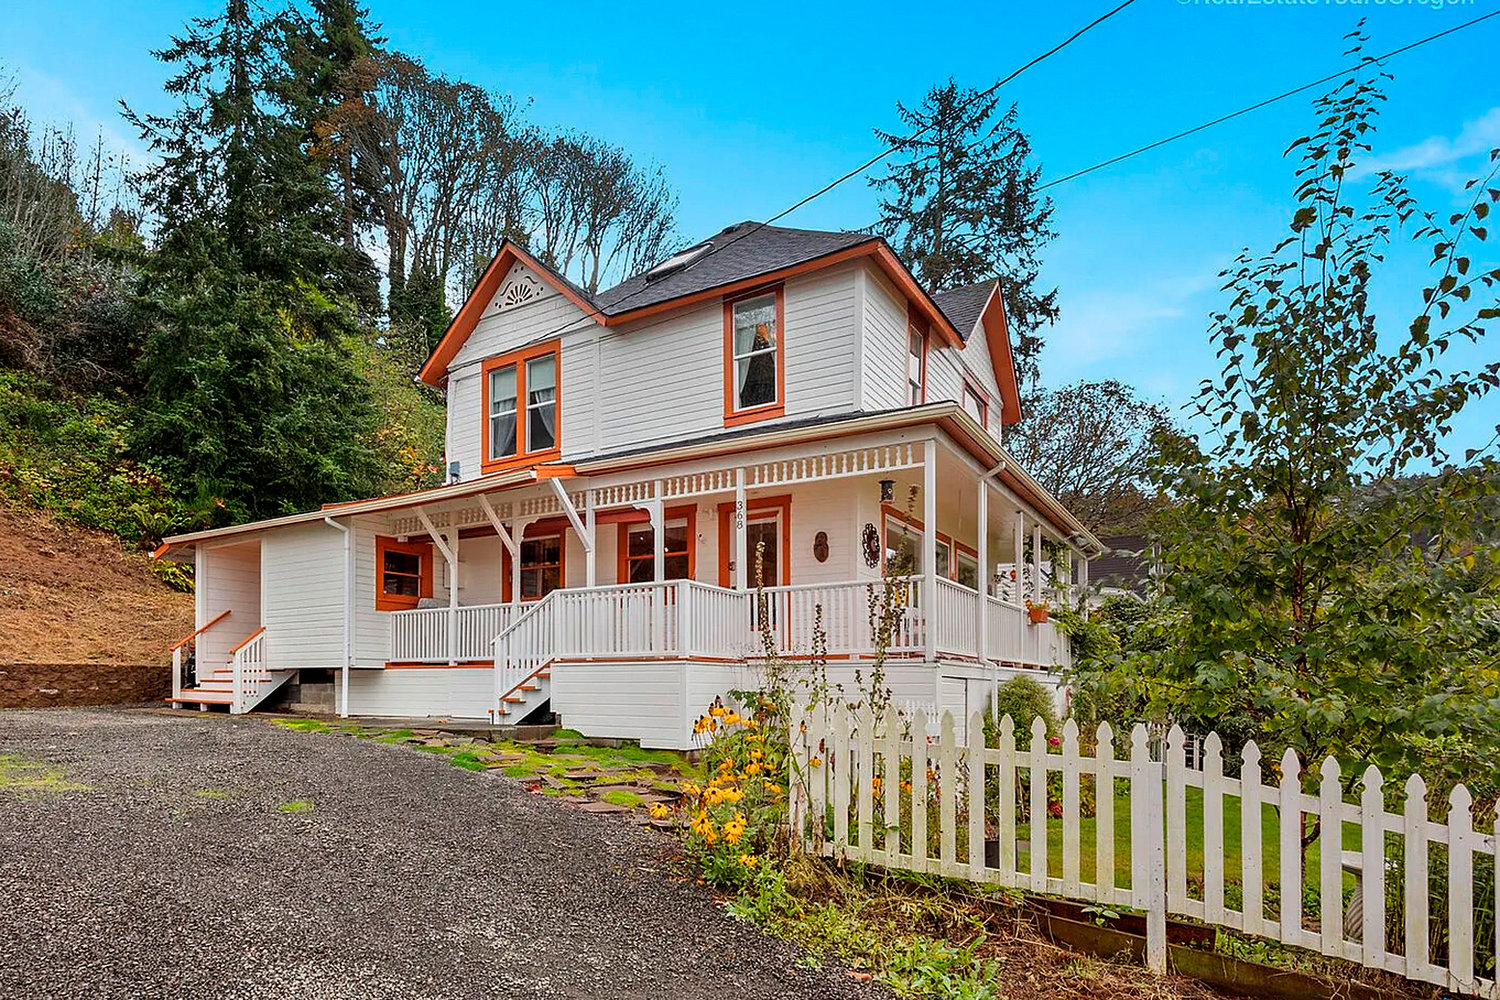 In this undated photo provided by RETO Media is the house featured in the Steven Spielberg film "The Goonies" in Astoria, Ore. The listing agent for the Victorian home said this week the likely new owner is a fan of the classic coming-of-age movie about friendships and treasure hunting, and he promises to preserve and protect the landmark. The 1896 home with sweeping views of the Columbia River flowing into the Pacific Ocean was listed in November with an asking price of nearly $1.7 million.